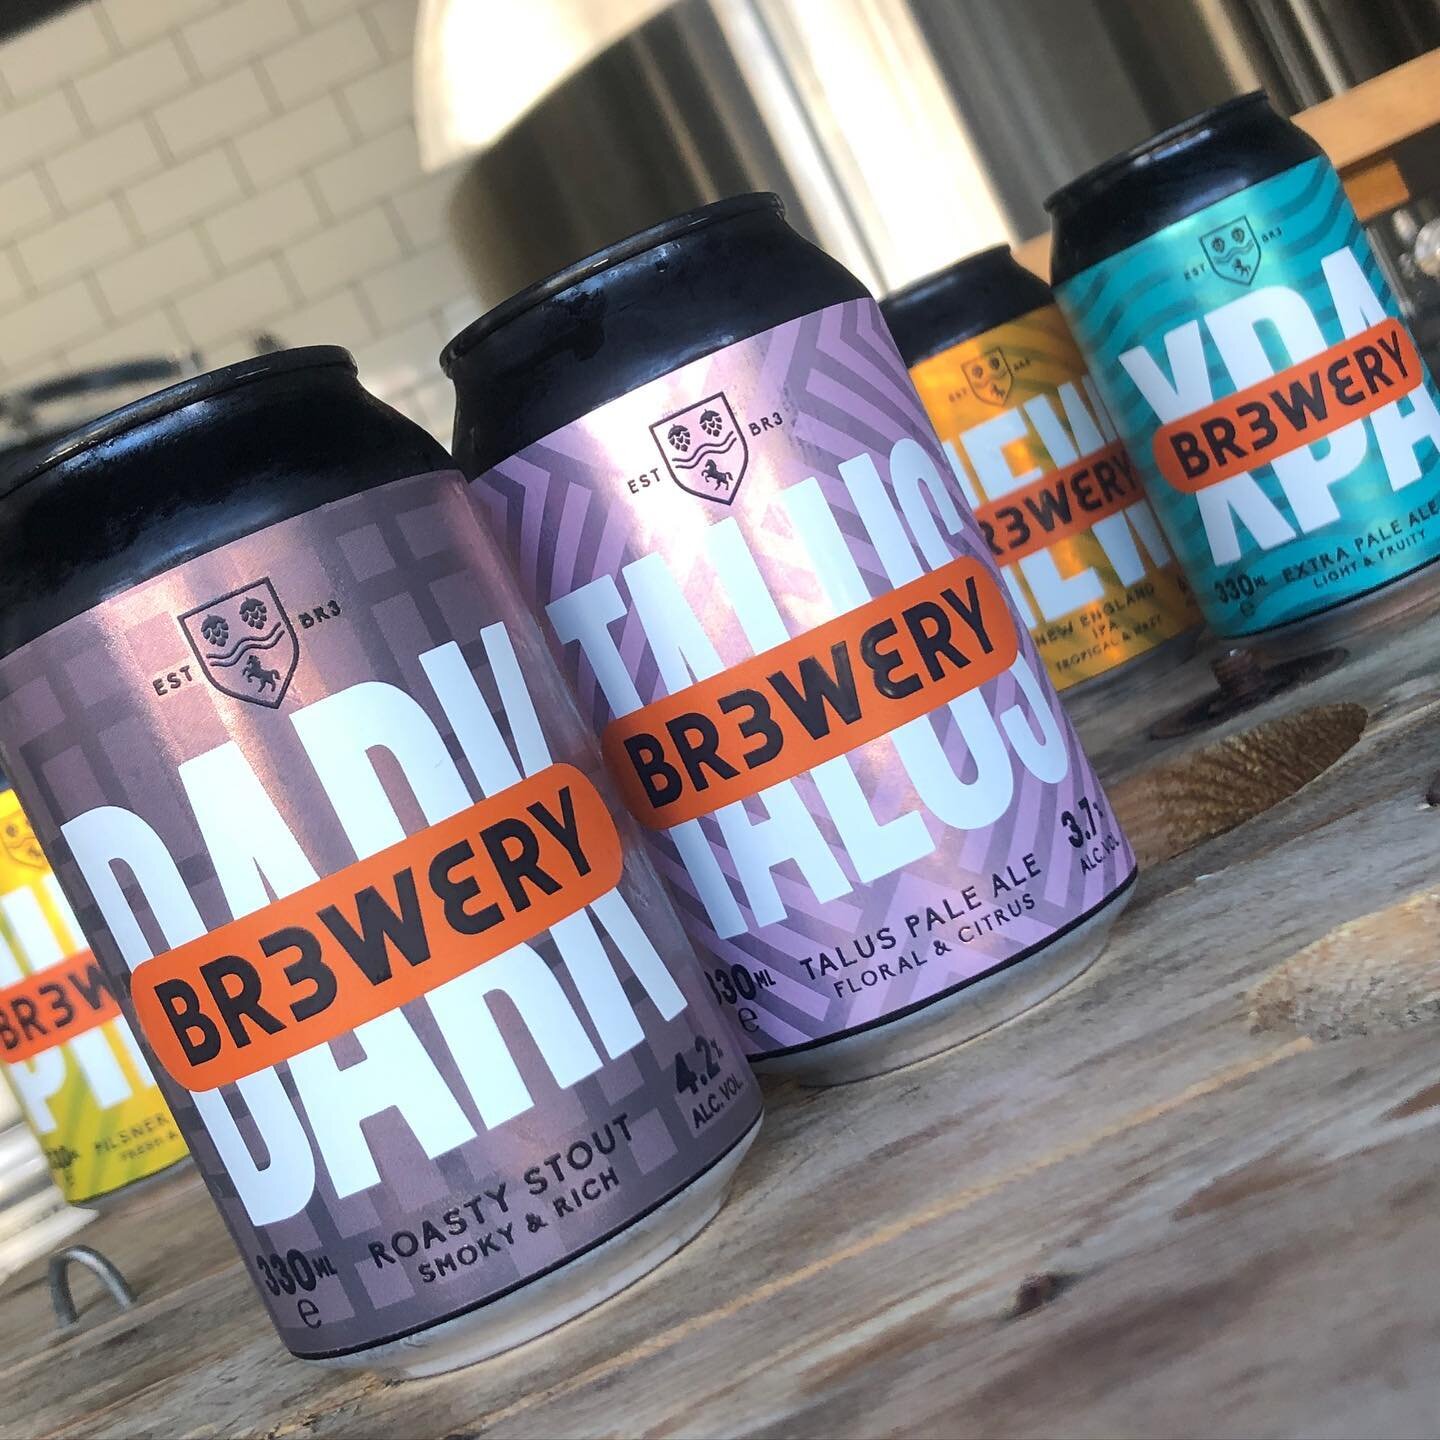 BR3WERY DARK &amp; BR3WERY TALUS now available in cans.

Available at our taproom together with our core range.

Proudly born &amp; brewed in Beckenham.

Cheers to beers 🍻